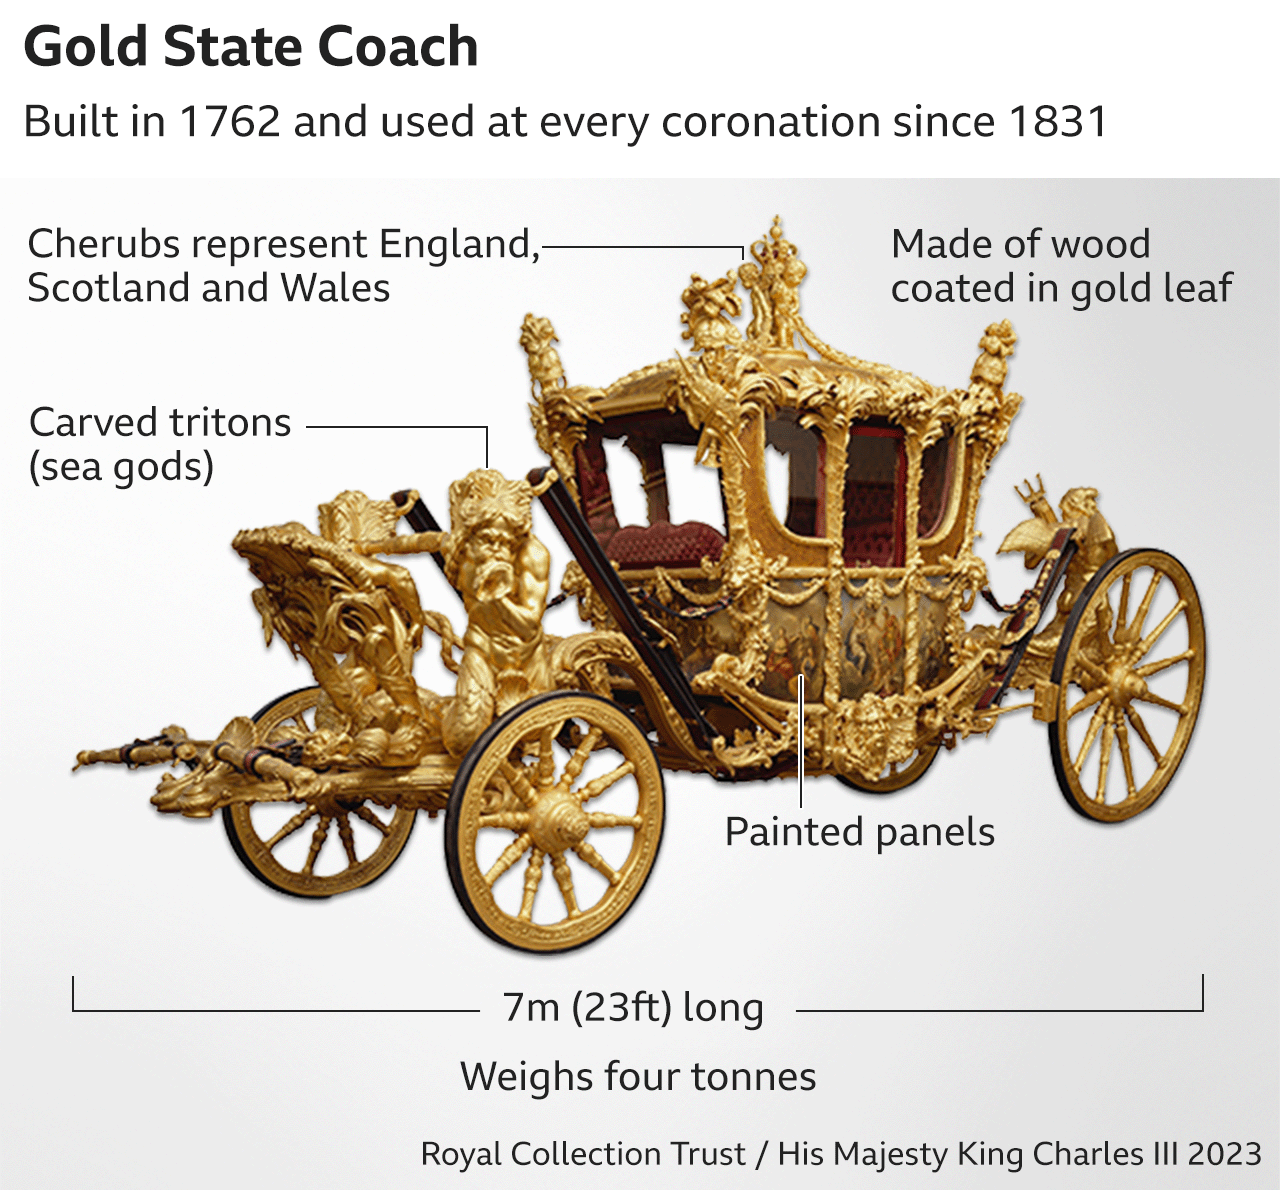 Graphic of Gold State Coach highlighting that it is made of wood coated in gold leaf and weighs four tonnes